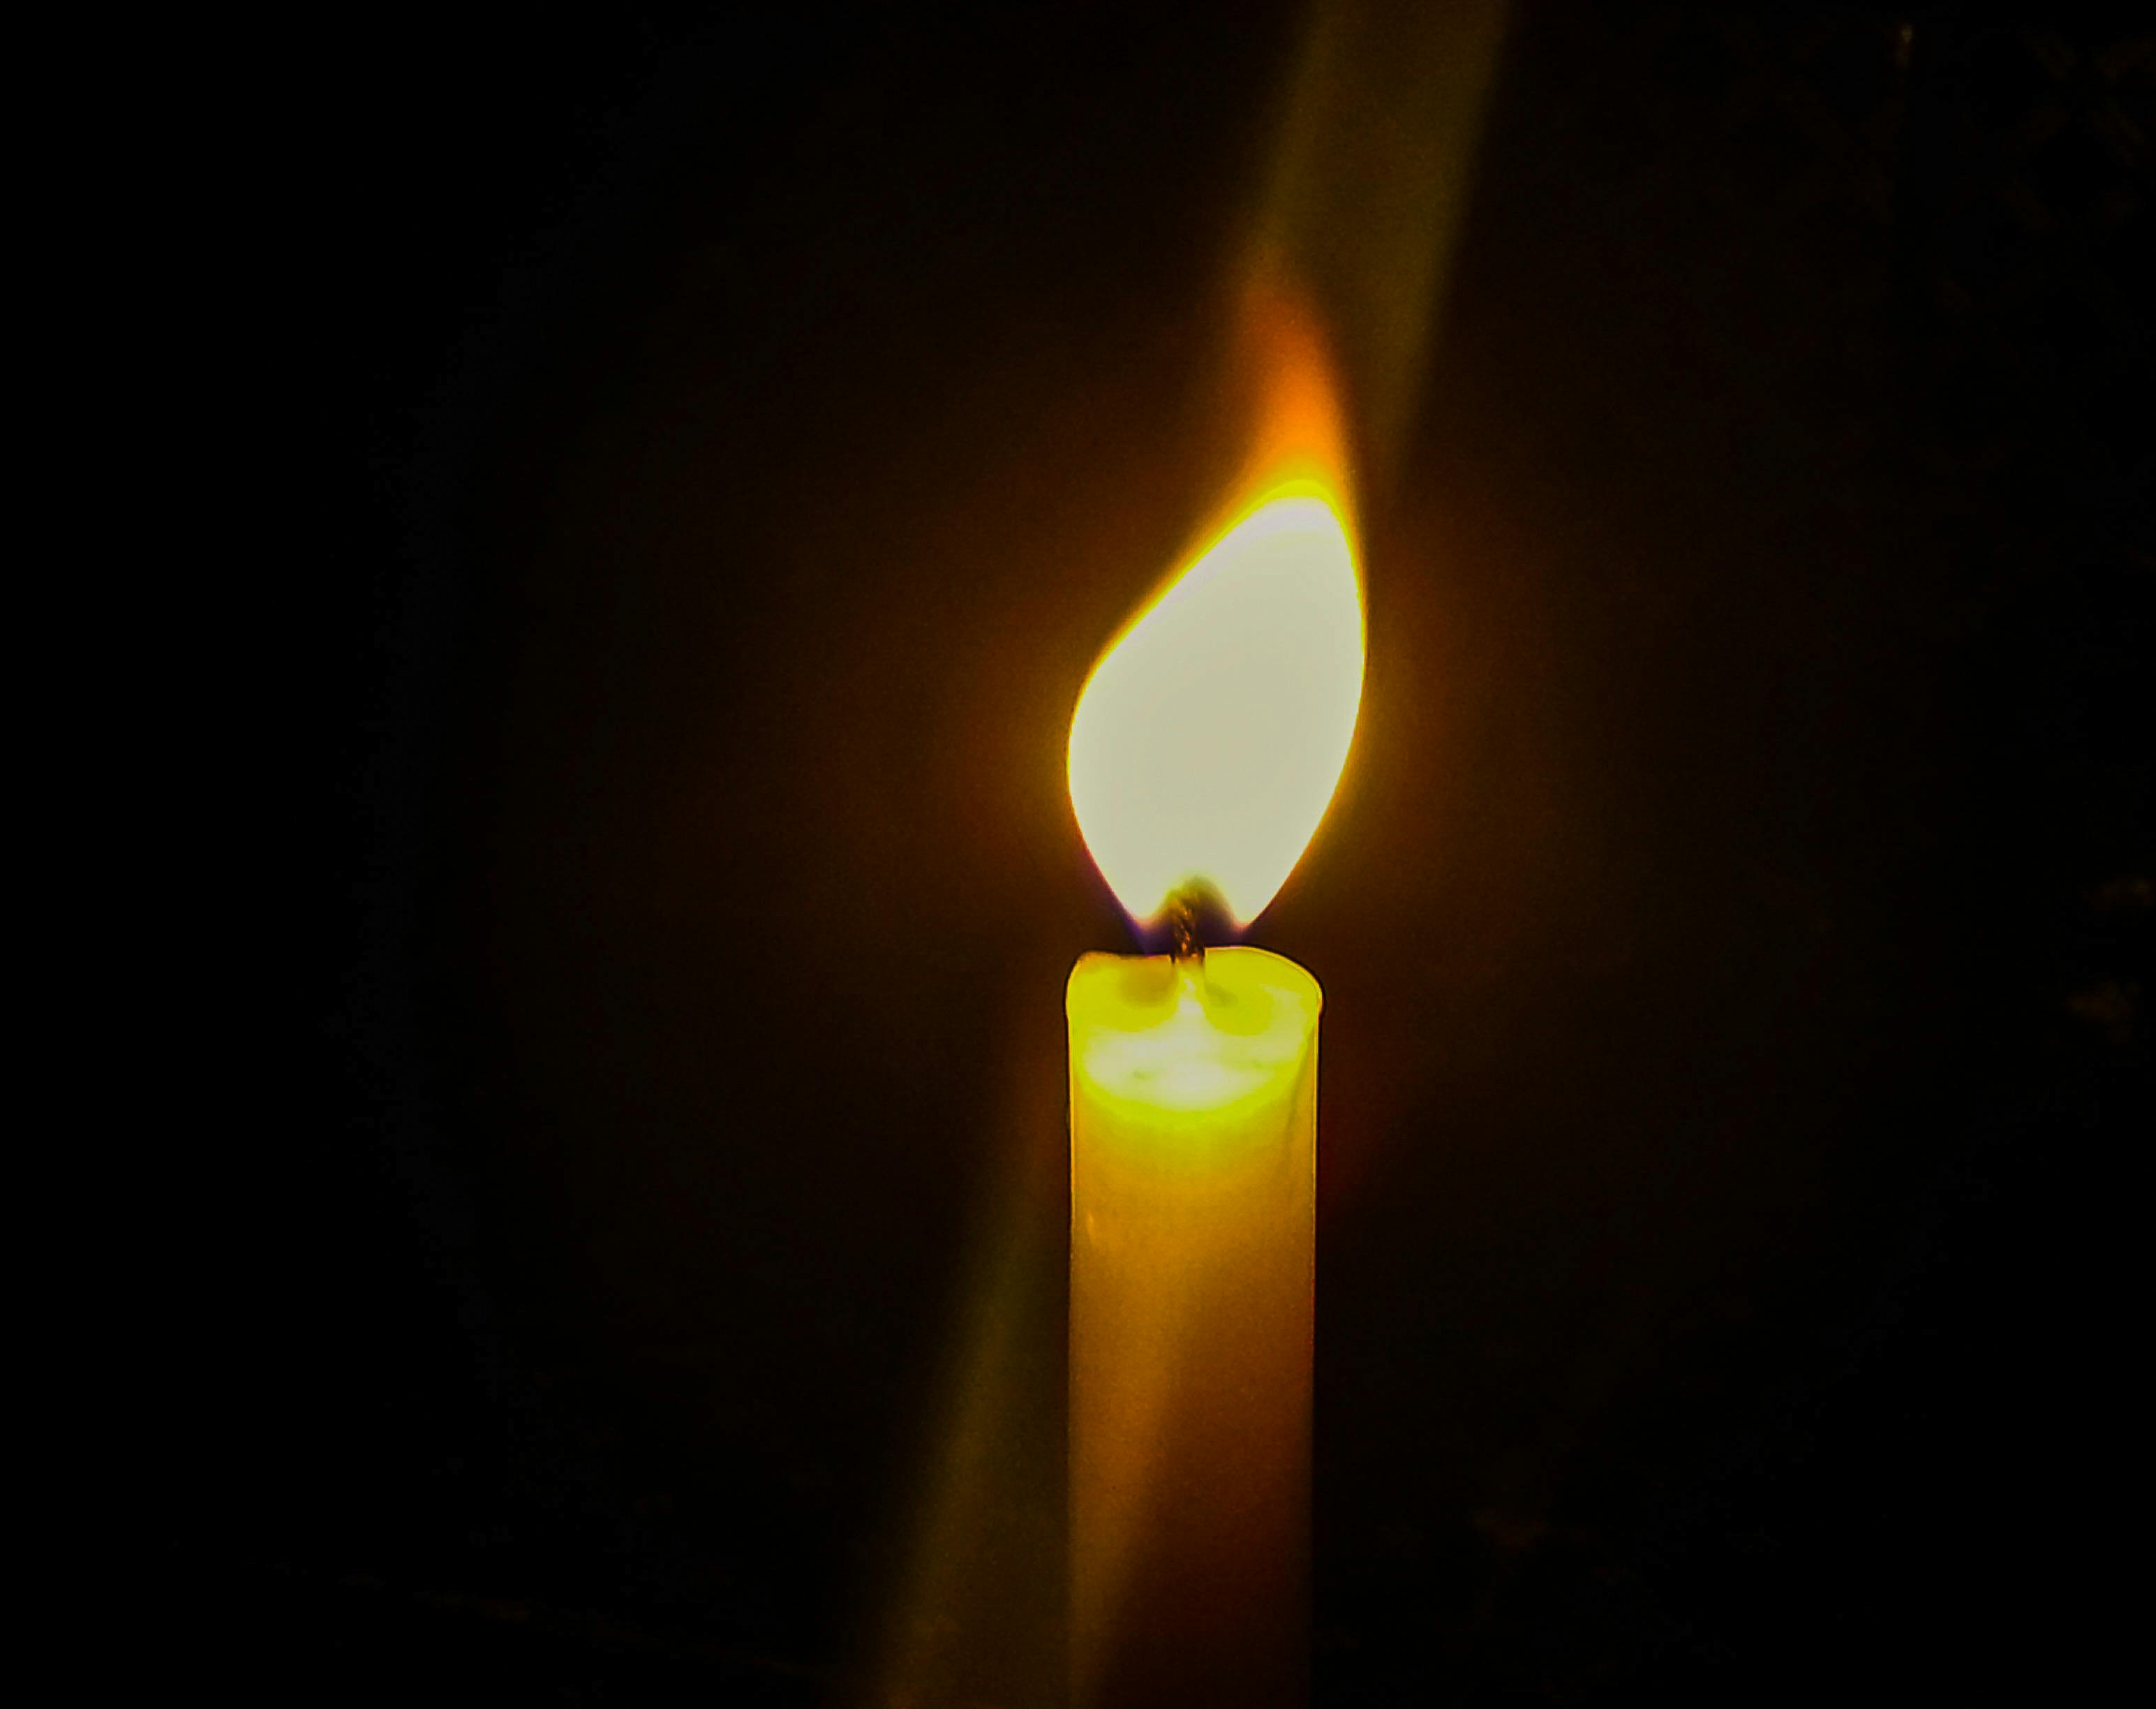 Free stock photo of candle, Lighted candle